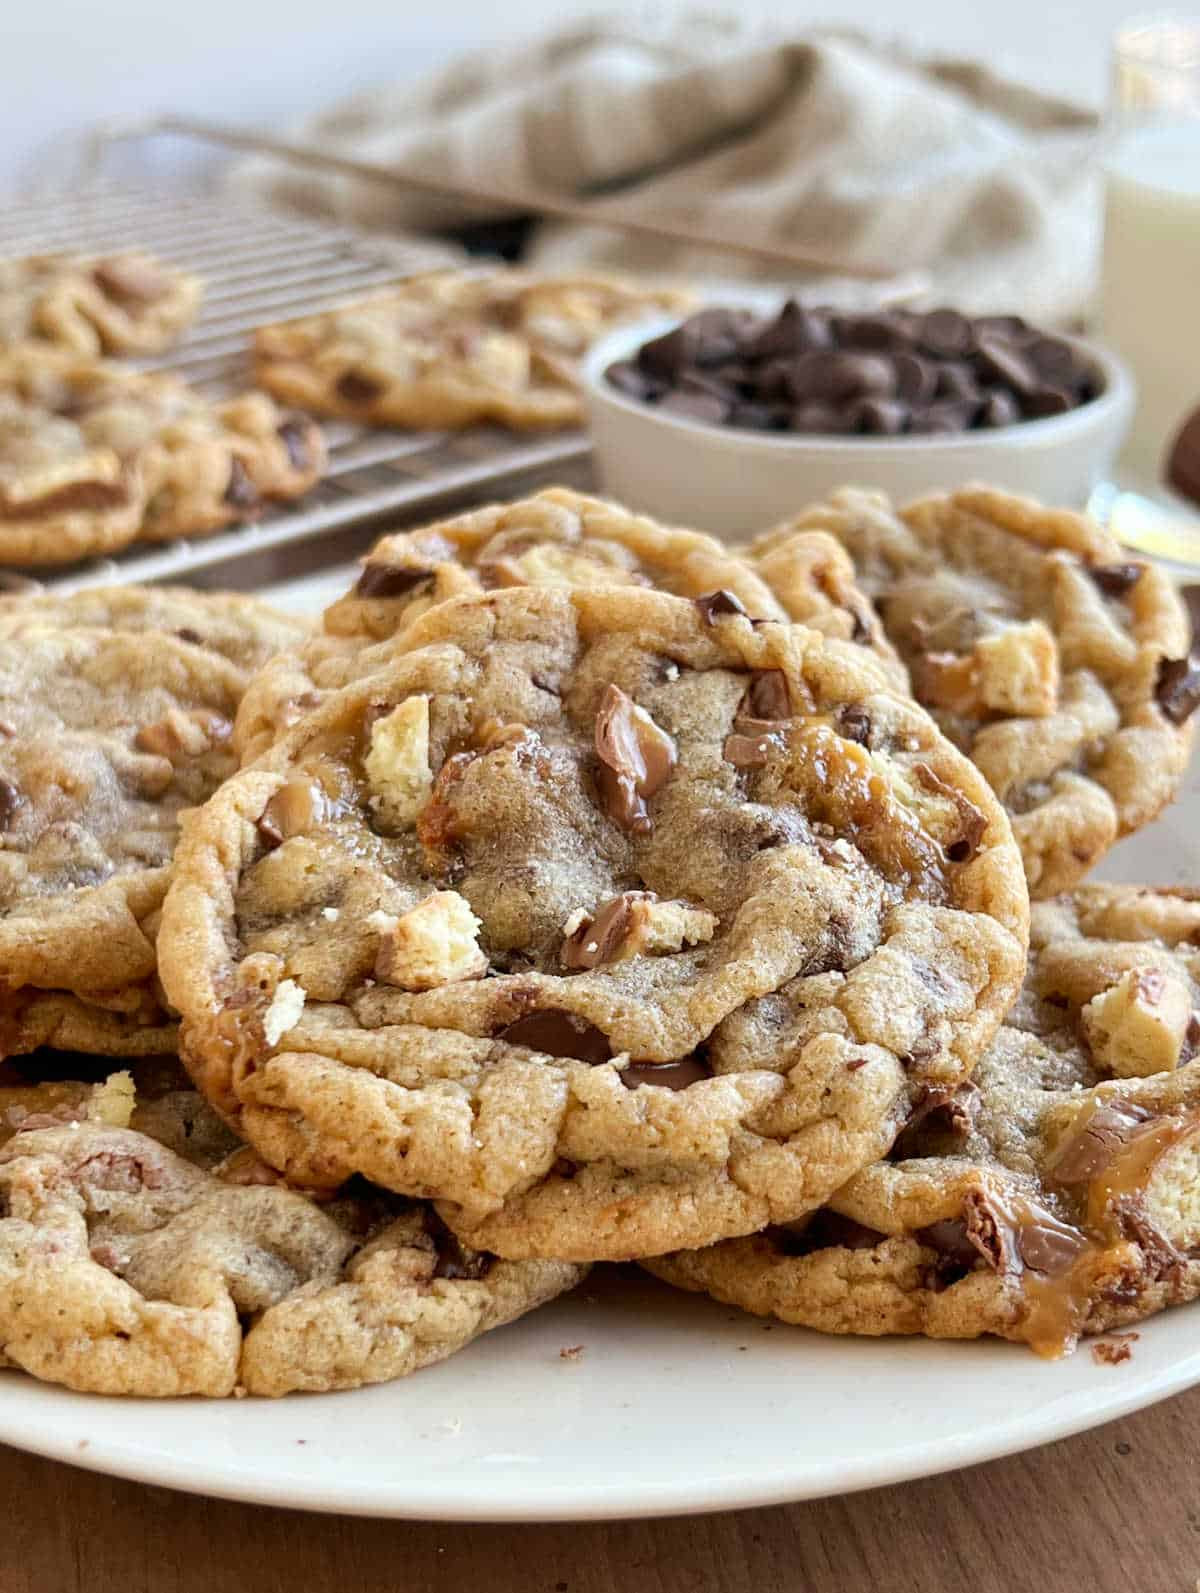 chocolate chip cookies with Twix bar pieces on plate.